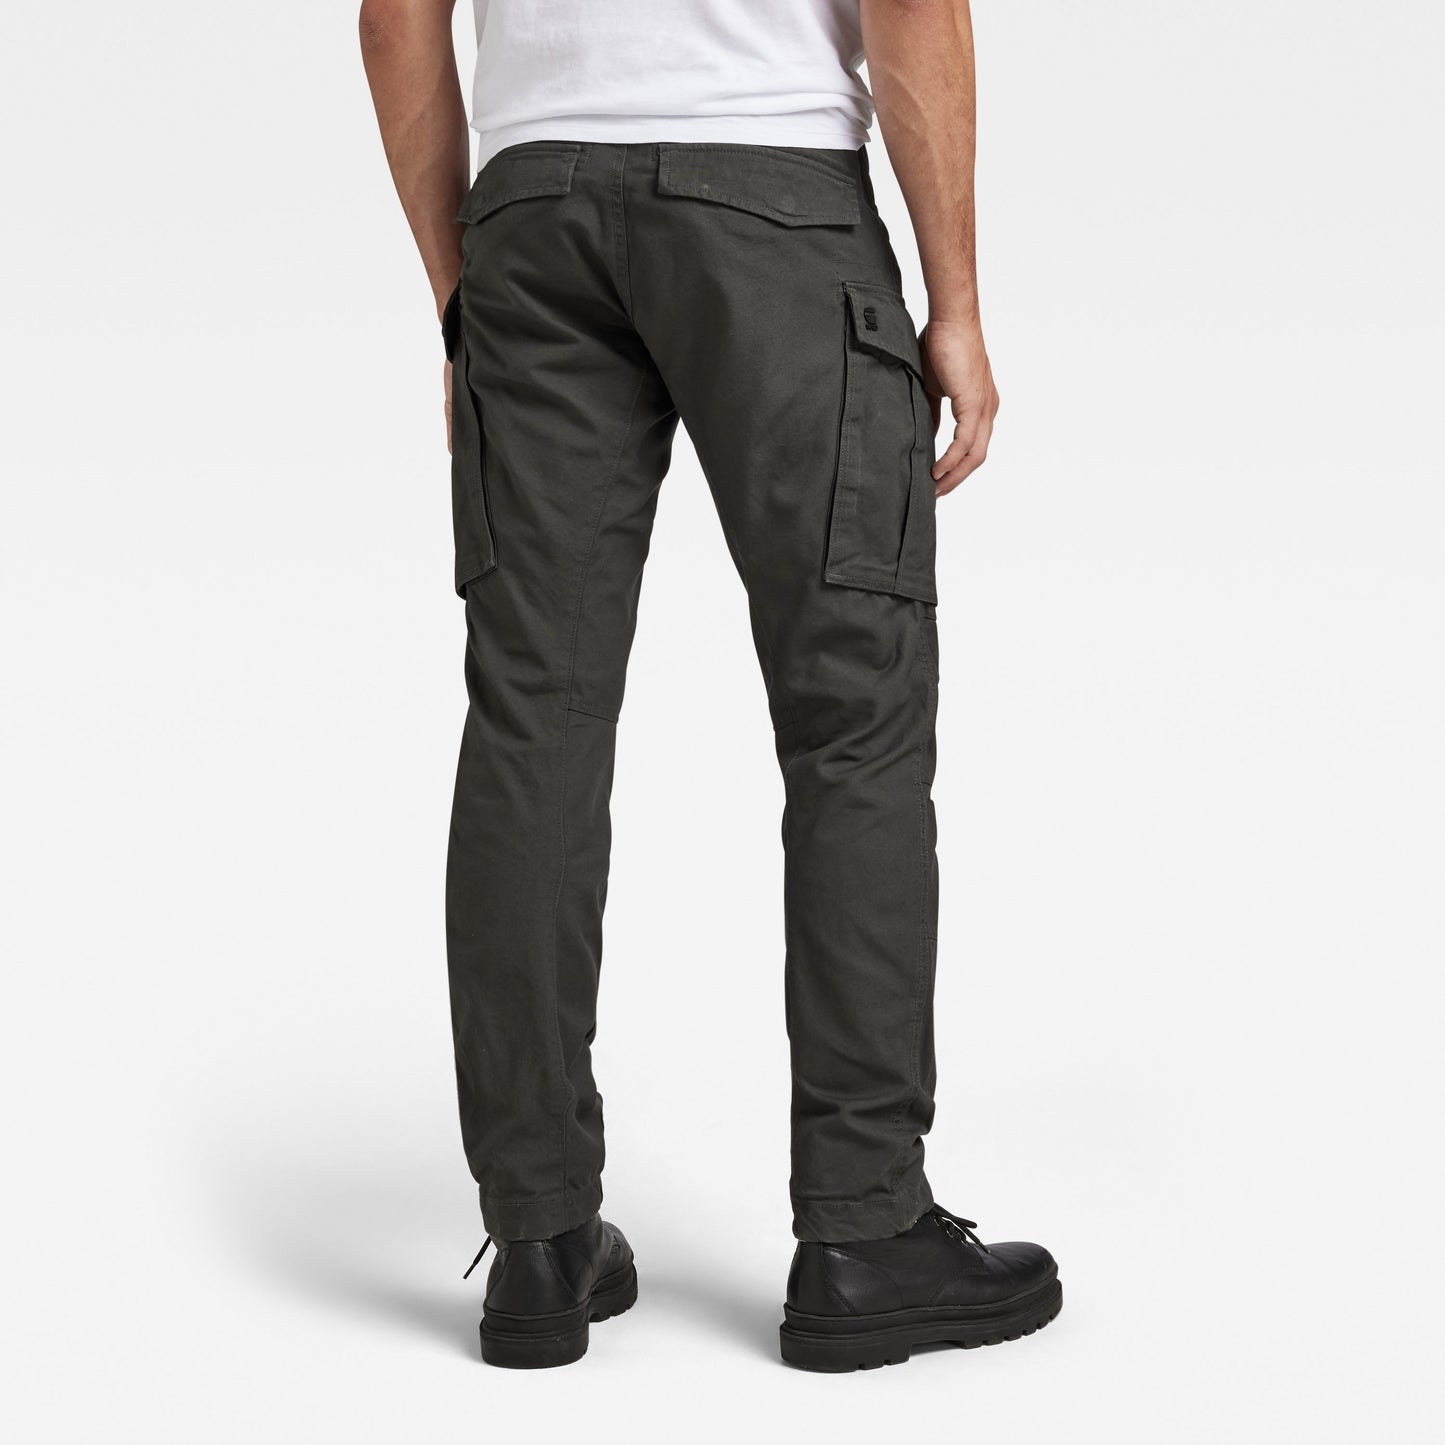 G-STAR Rovic Zip 3D Straight Tapered Pant 'Cloack' – Route66.co.nz